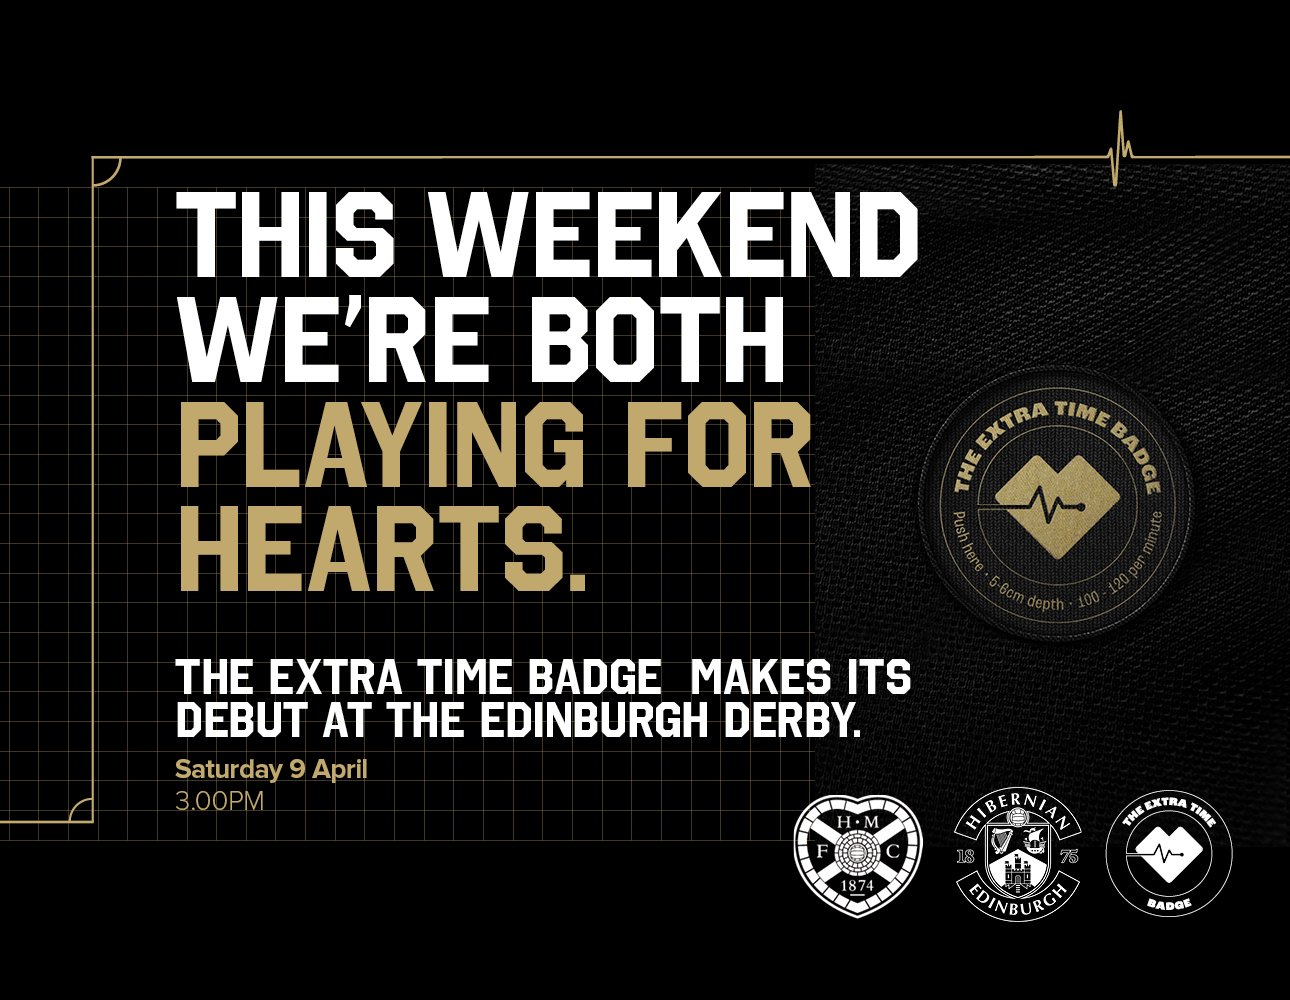 The Extra Time Badge will launch at the Edinburgh Derby